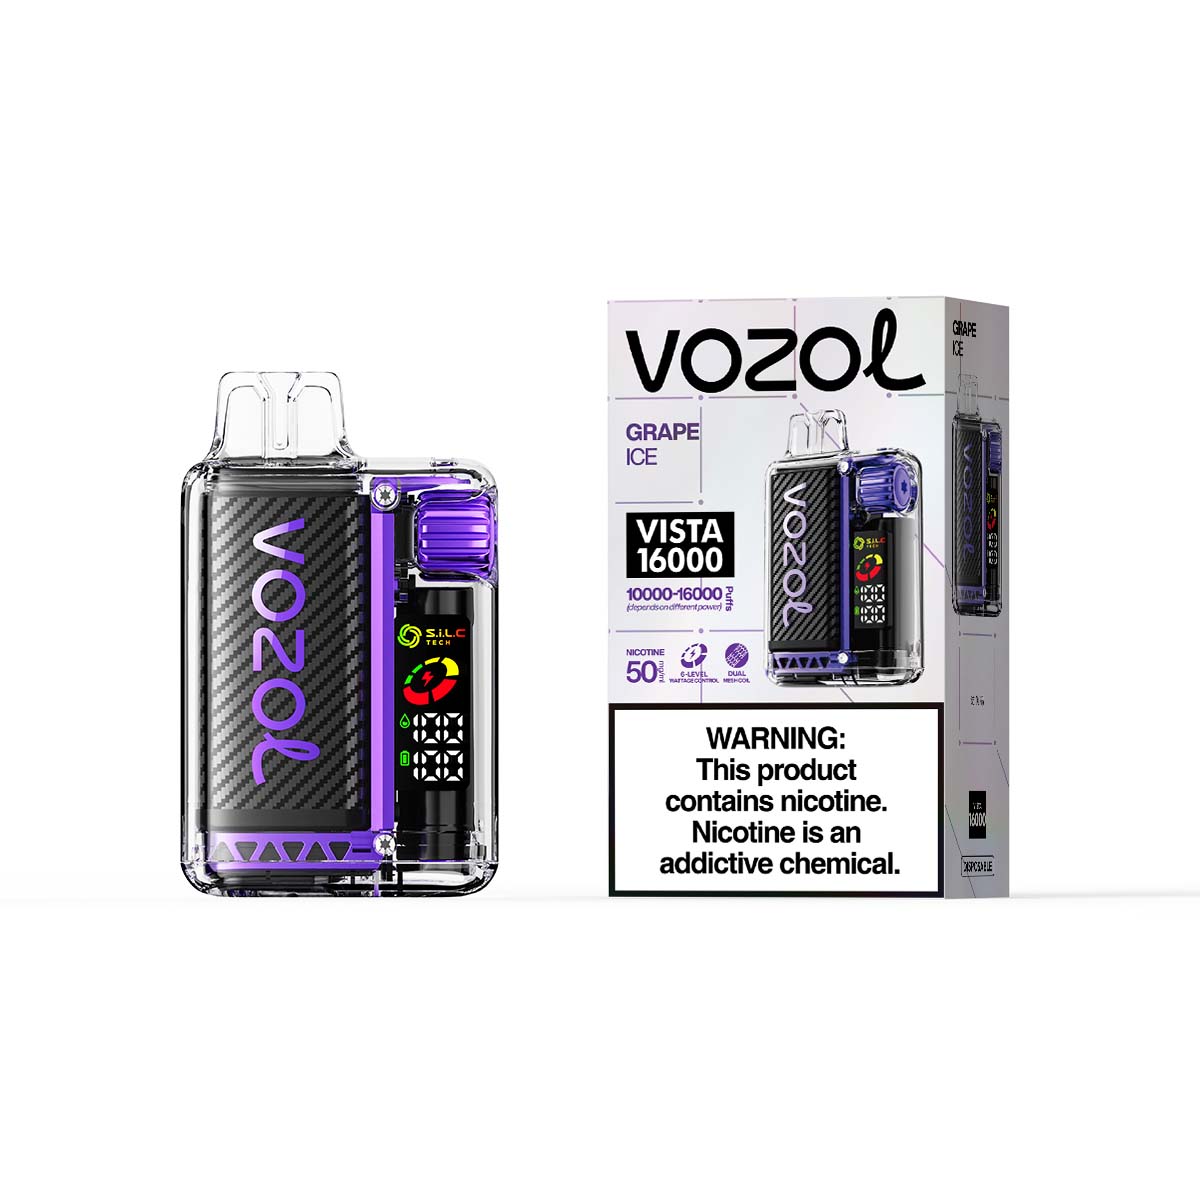 VOZOL Vista 16000 Puffs Rechargeable Disposable Device - 16000 Puffs [BUY 5 BOXES GET 1 FREE]